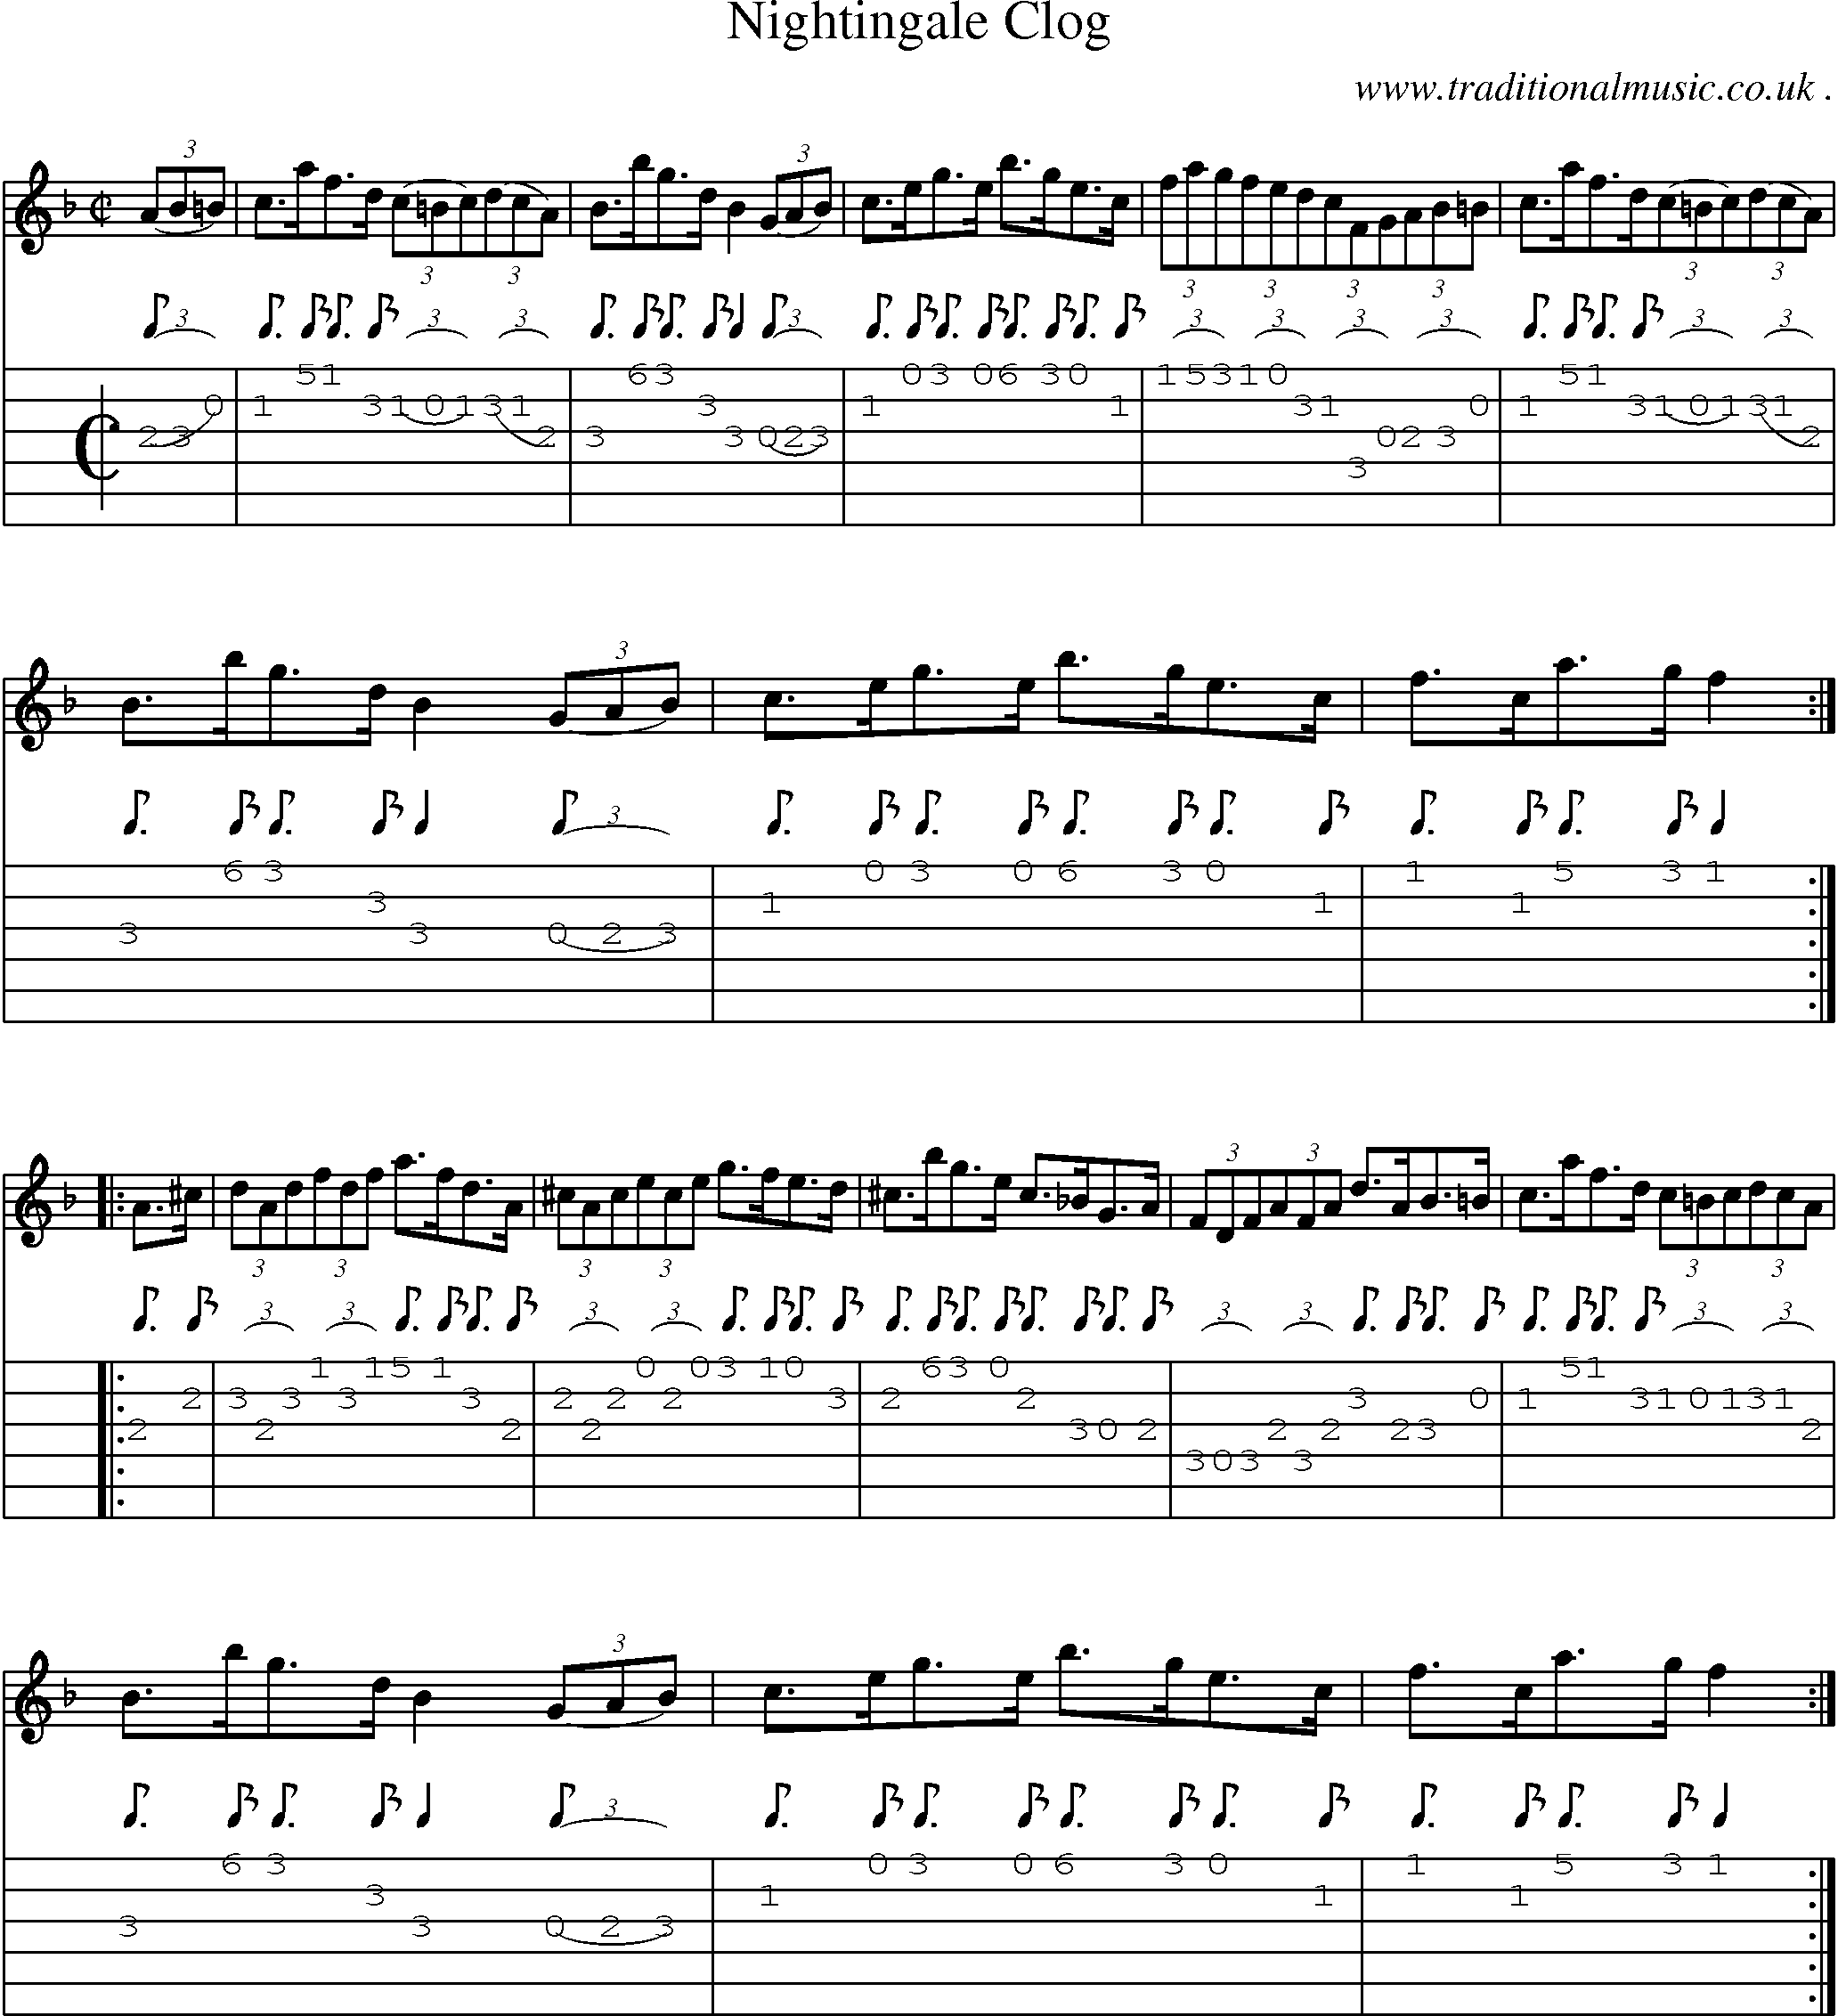 Sheet-Music and Guitar Tabs for Nightingale Clog